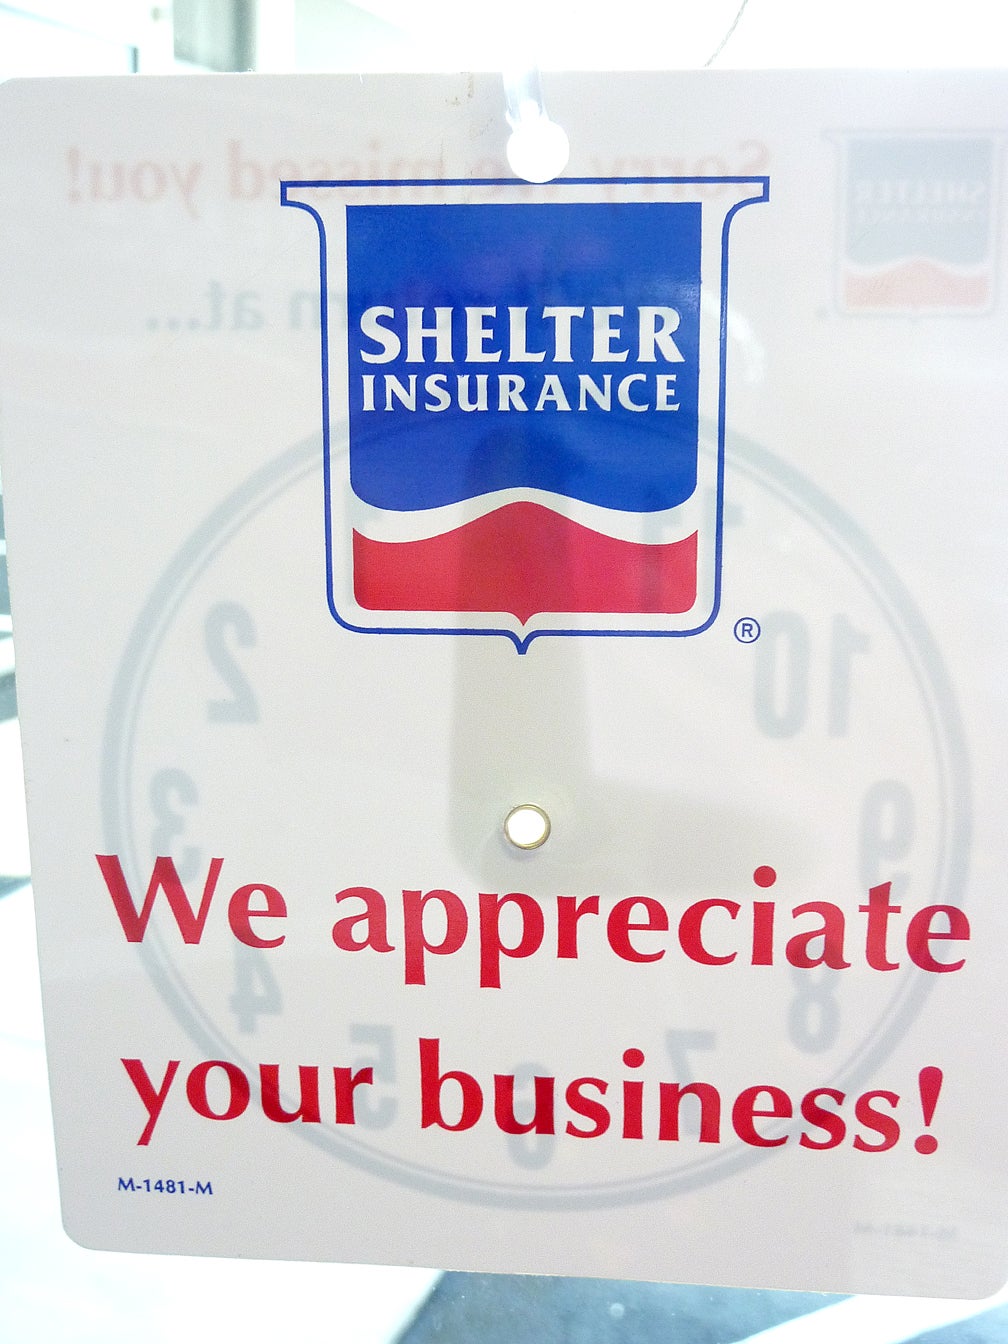 At your service: Shelter Insurance agent Audrey Marshall serving customers 24 hours a day, seven days a week, 365 days a year